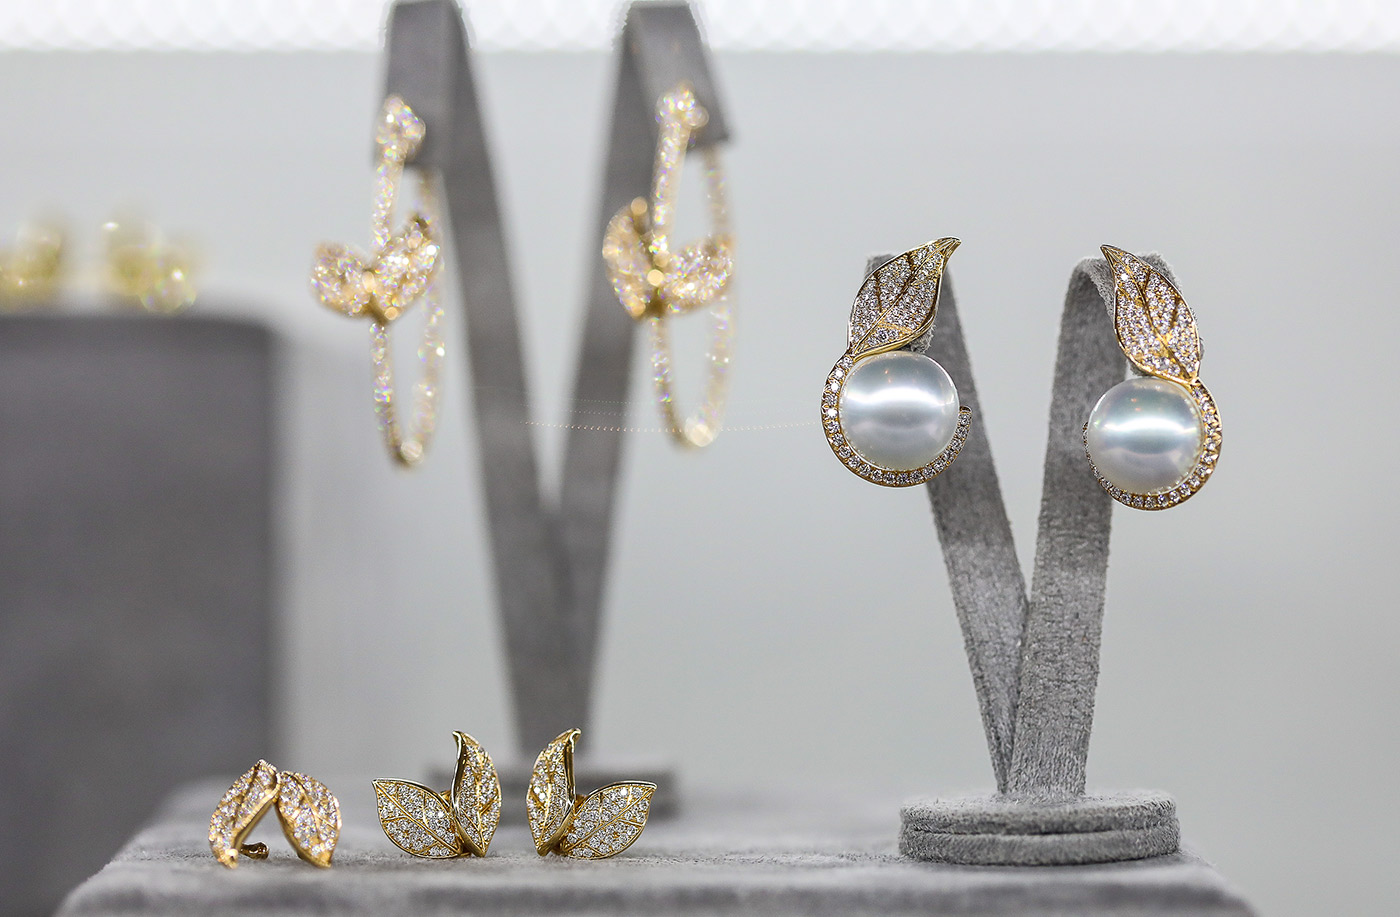 Nadine Aysoy Feuille collection earrings and ea-cuffs in yellow gold, pearls and diamonds